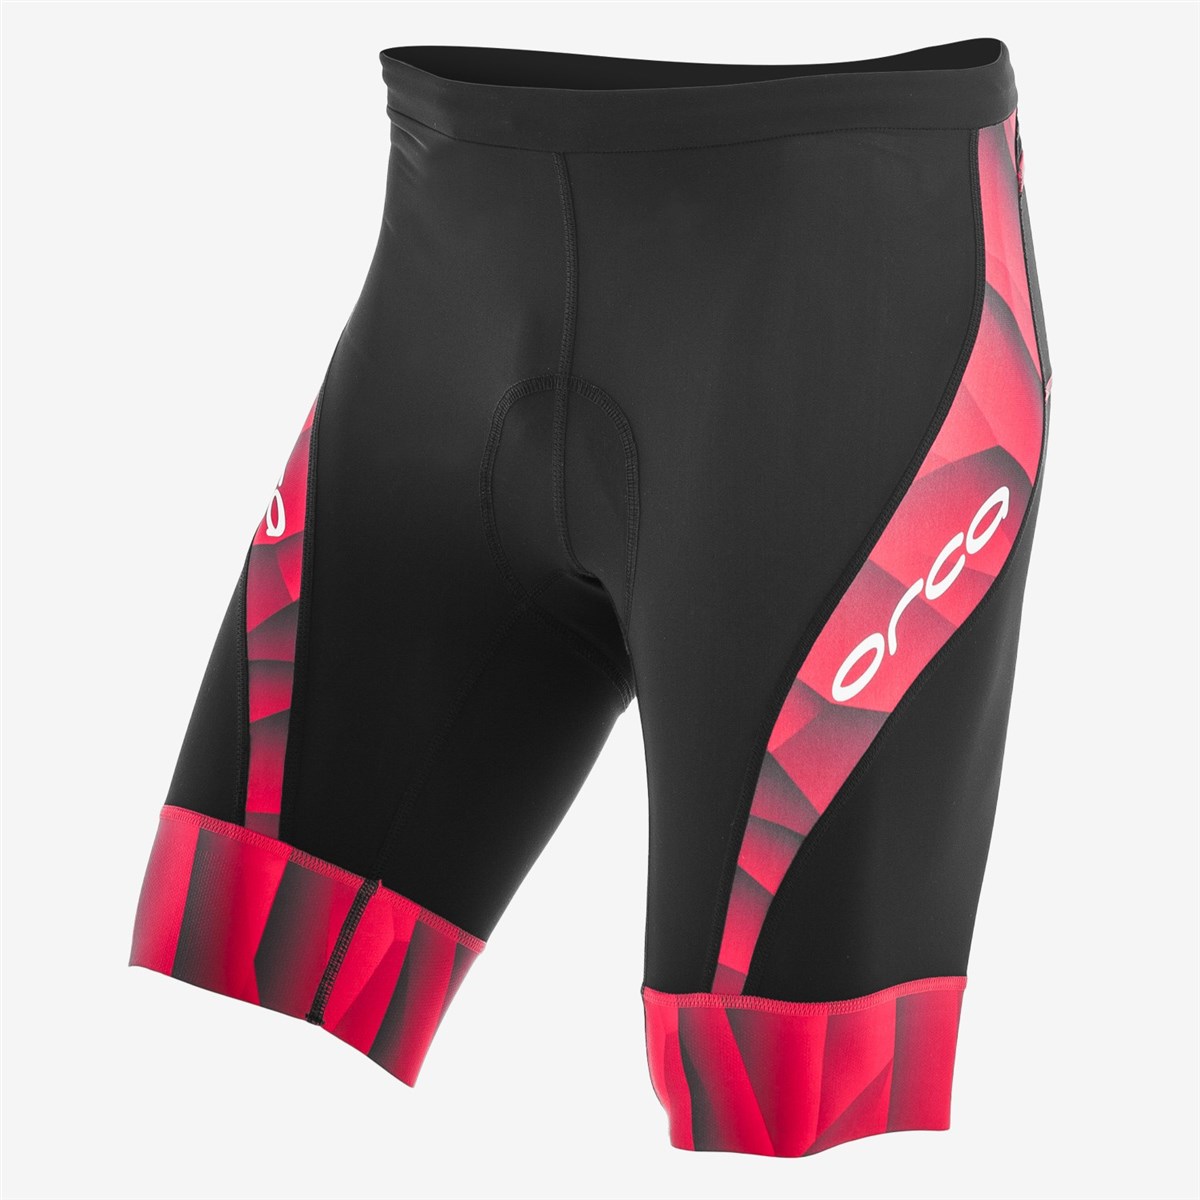 Orca 226 Tri Short product image